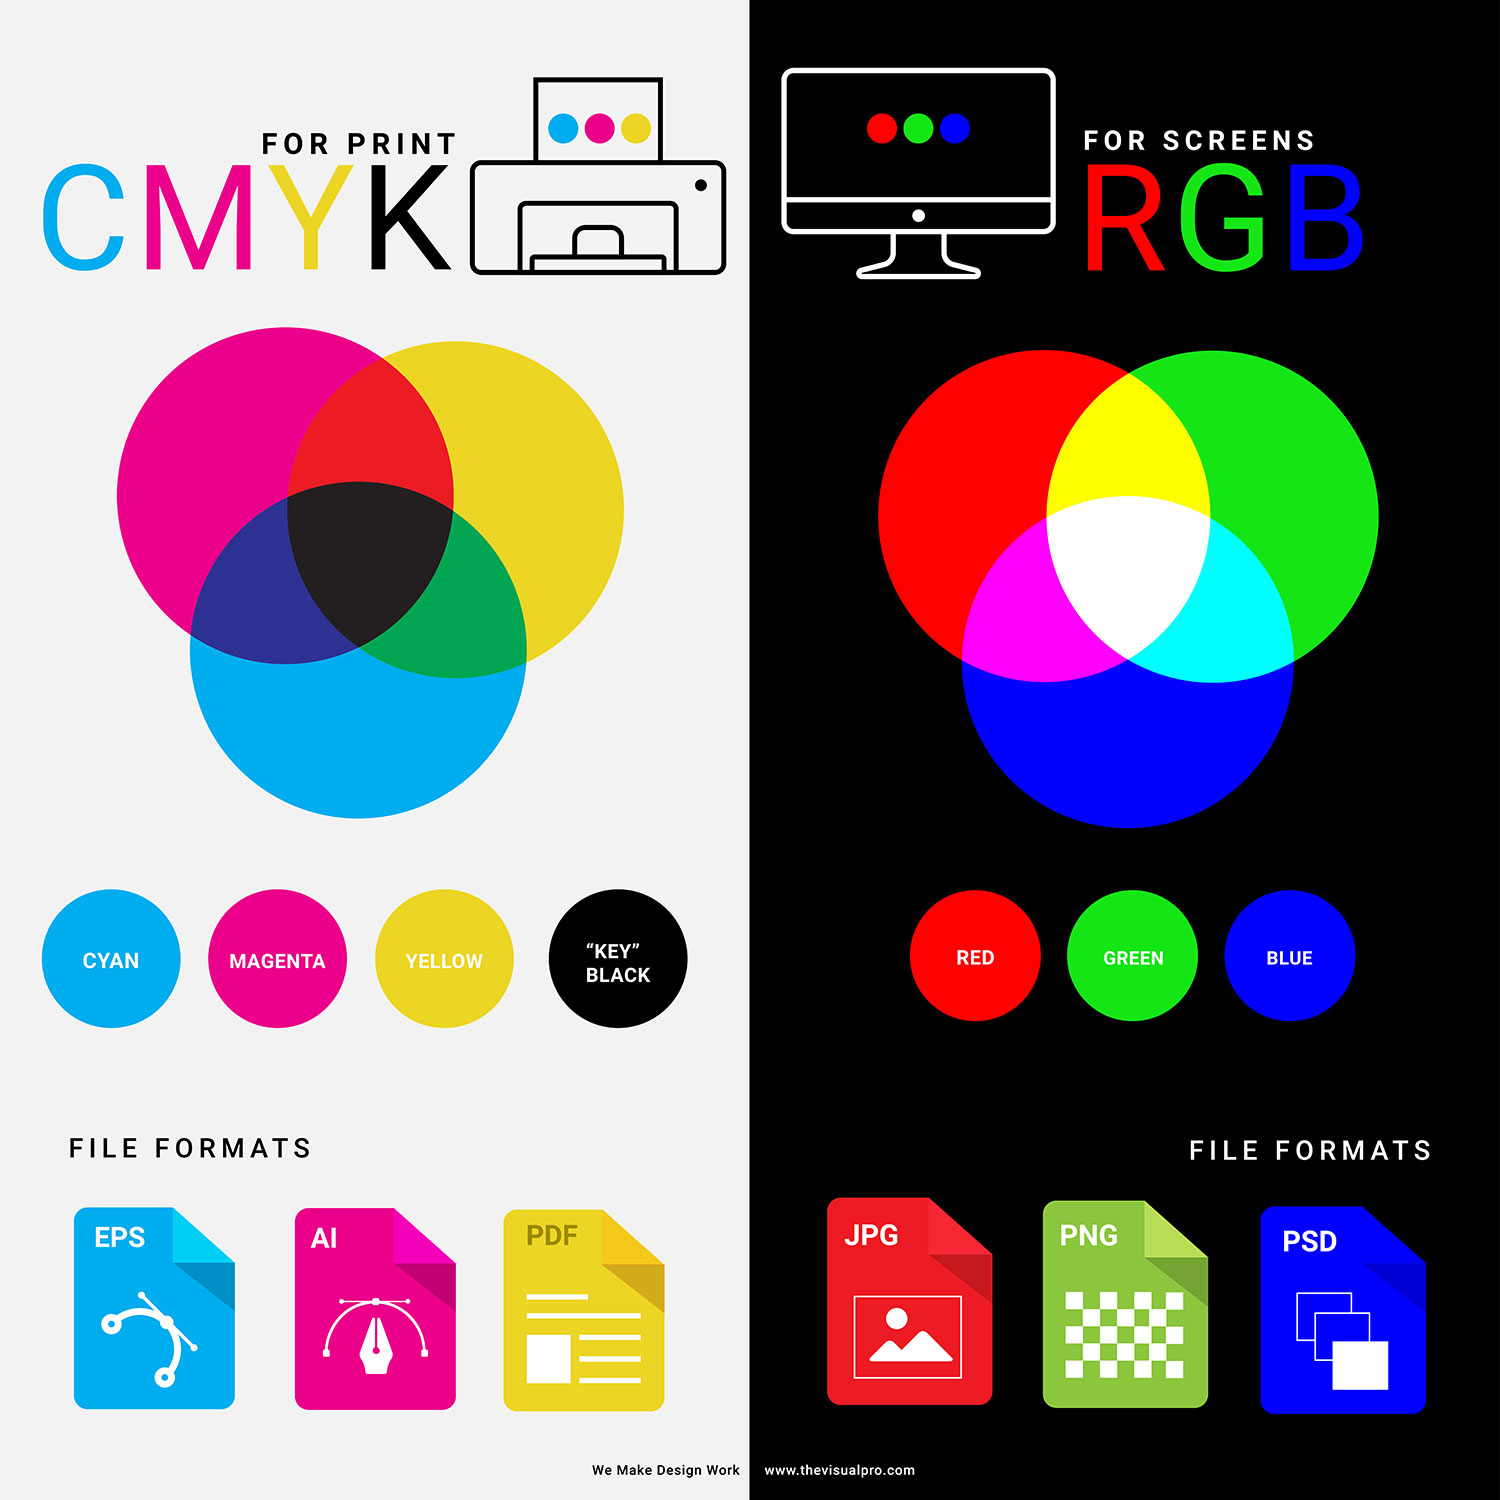 RGB, CMYK & Spot Colors: What You Need to Know